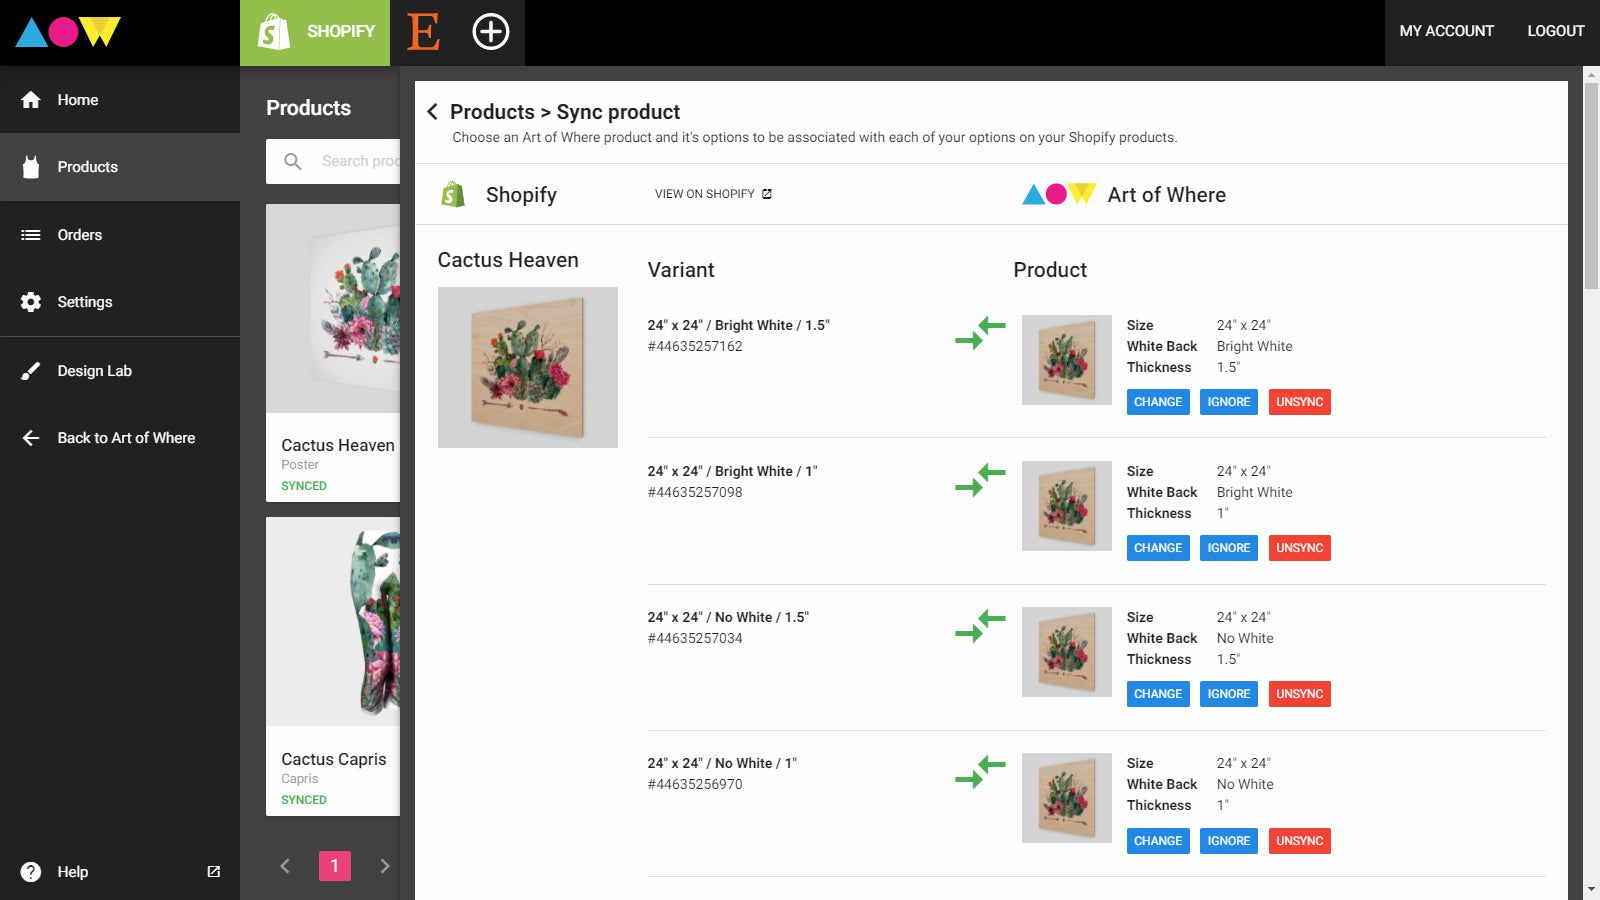 Sync your exisiting Shopify listings to Art of Where